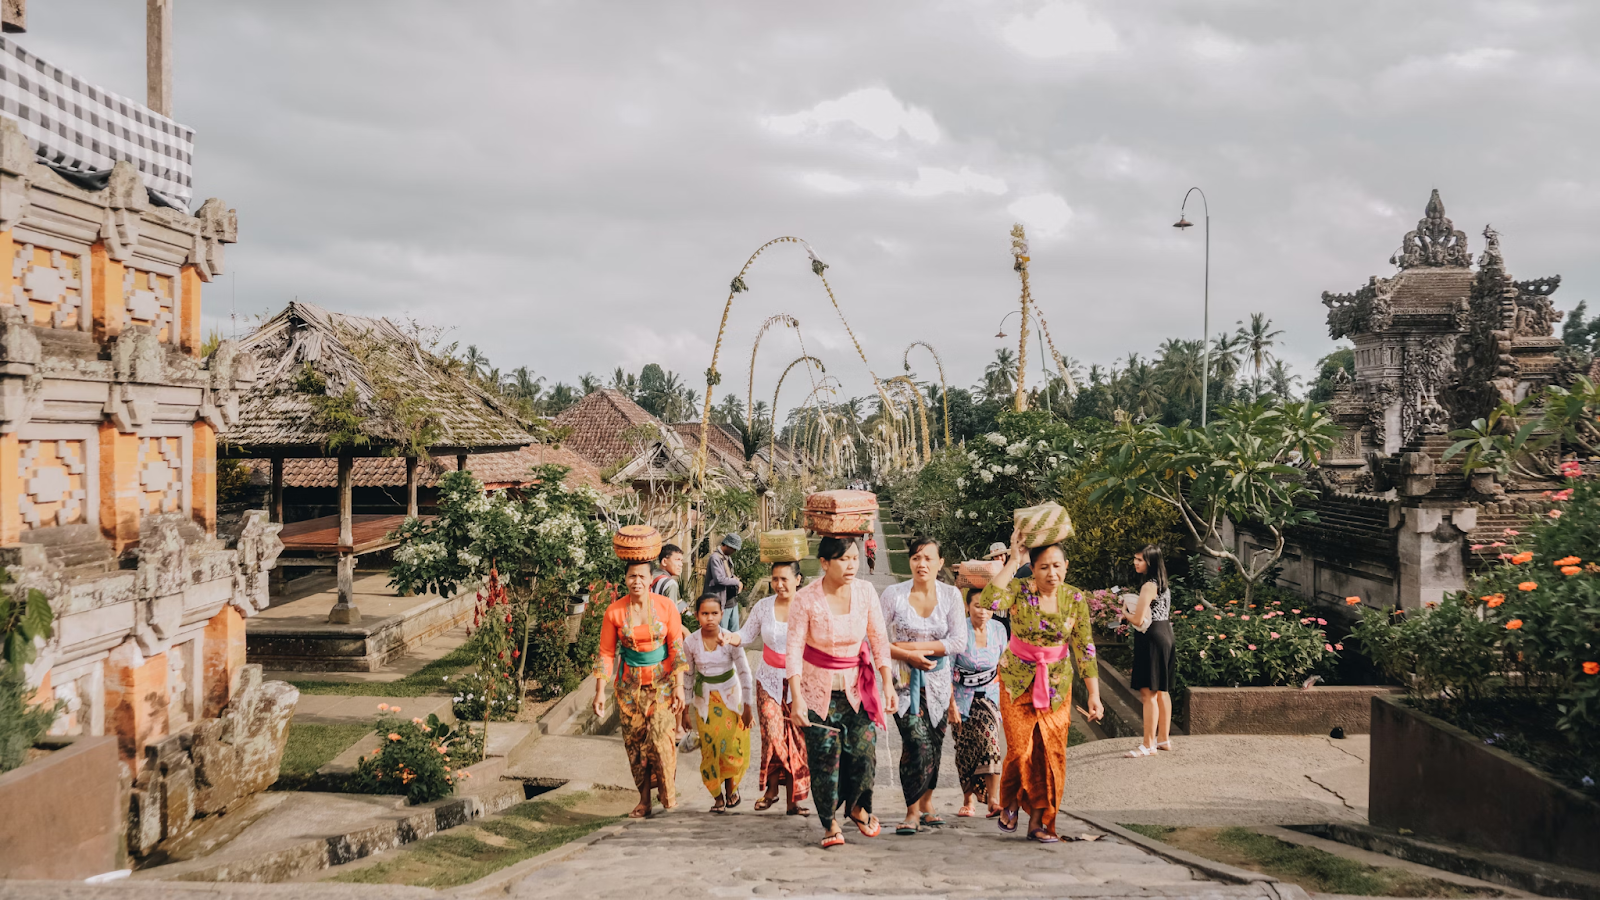 A group of Balinese women dressed in traditional attire, carrying baskets on their heads, walk through a village adorned with ceremonial decorations. The scene captures the cultural richness and vibrant community life of Bali, Indonesia, set against a backdrop of traditional Balinese architecture and lush greenery.